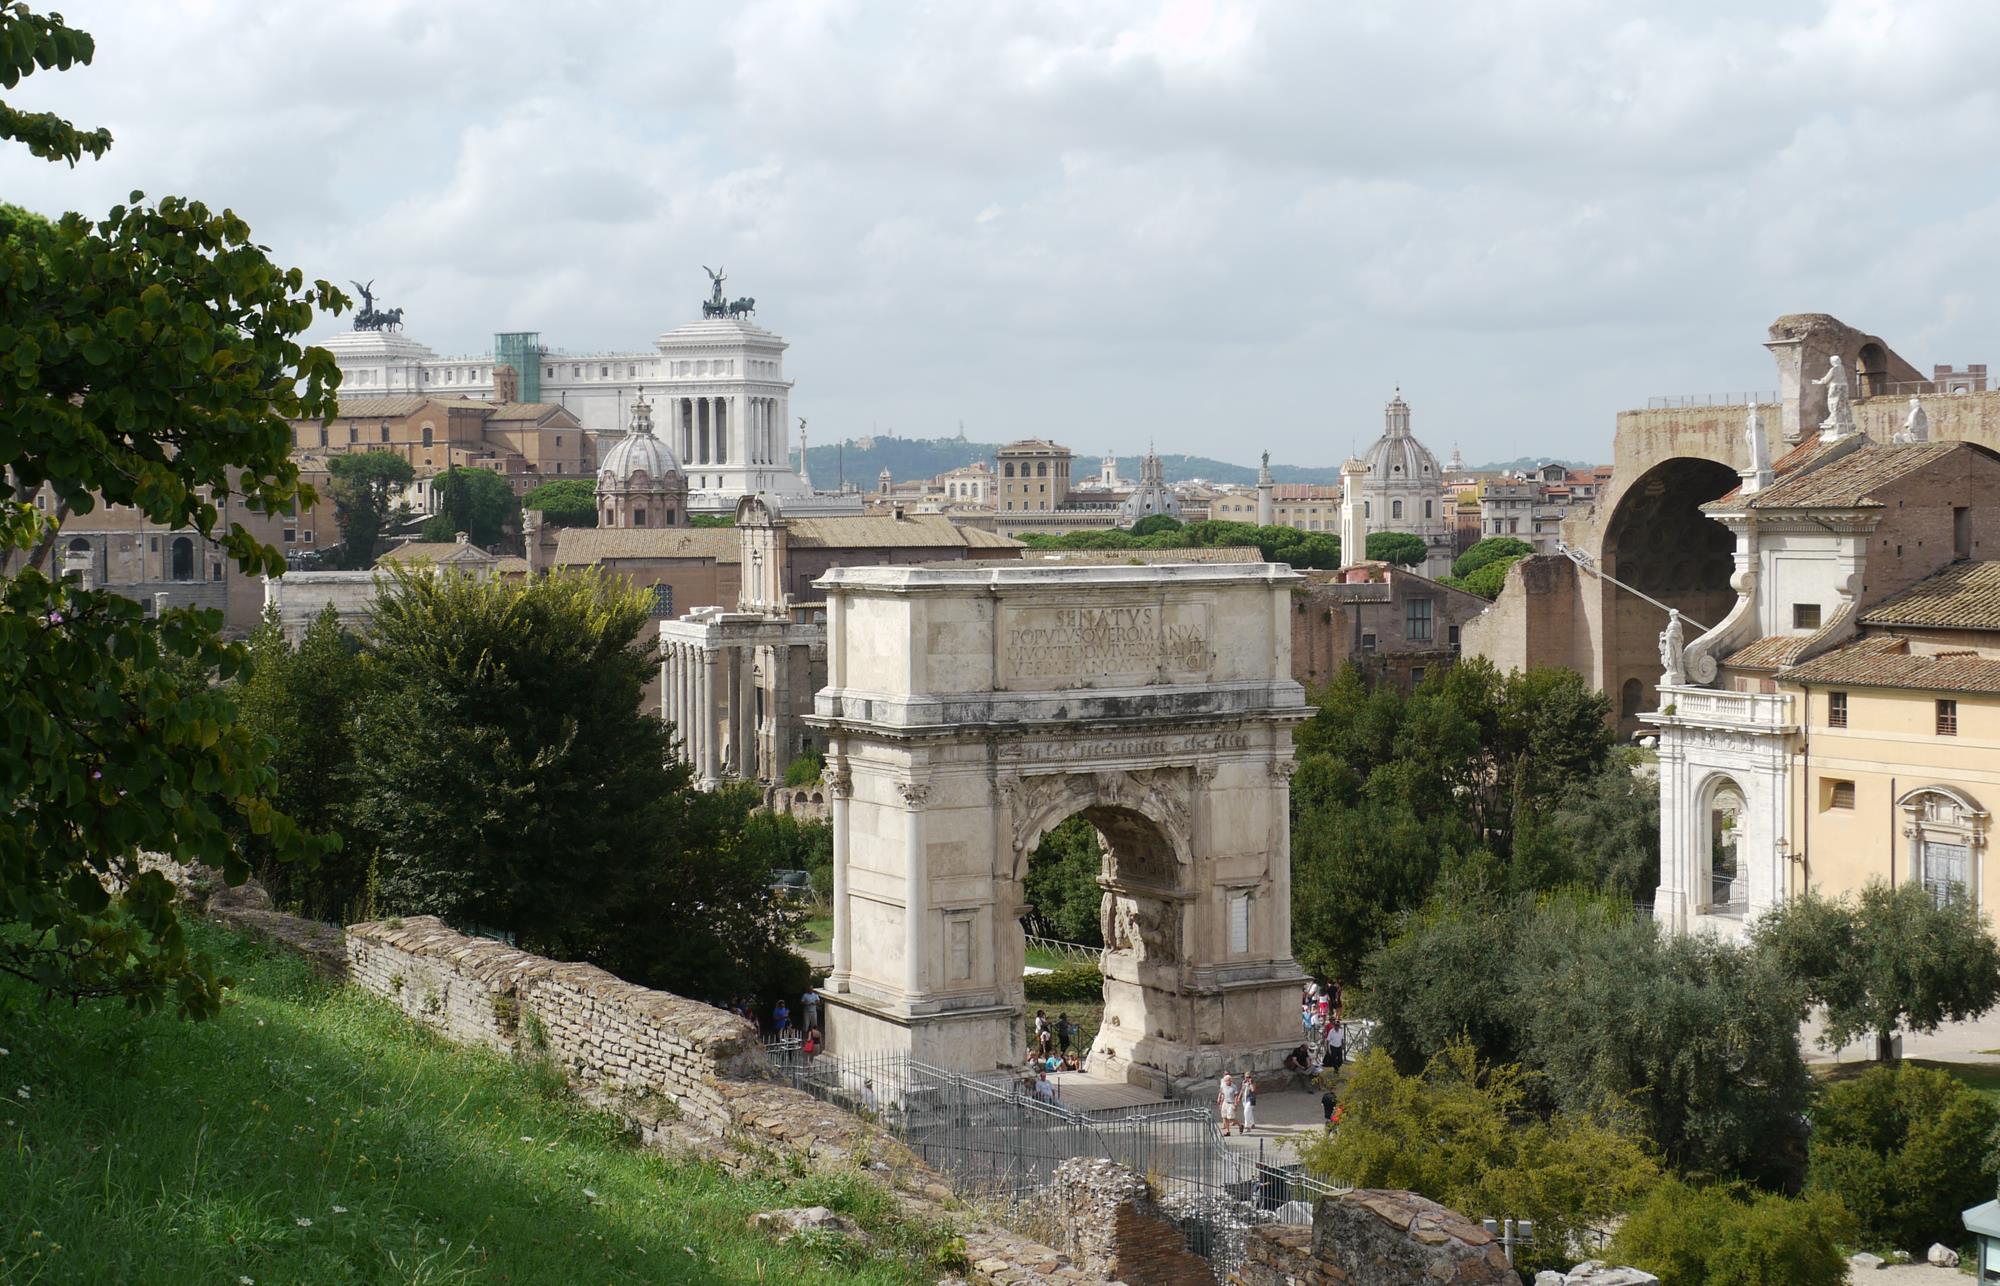 The Arch of Titus, built in 70 AD to commemorate the victories of Emperor Titus